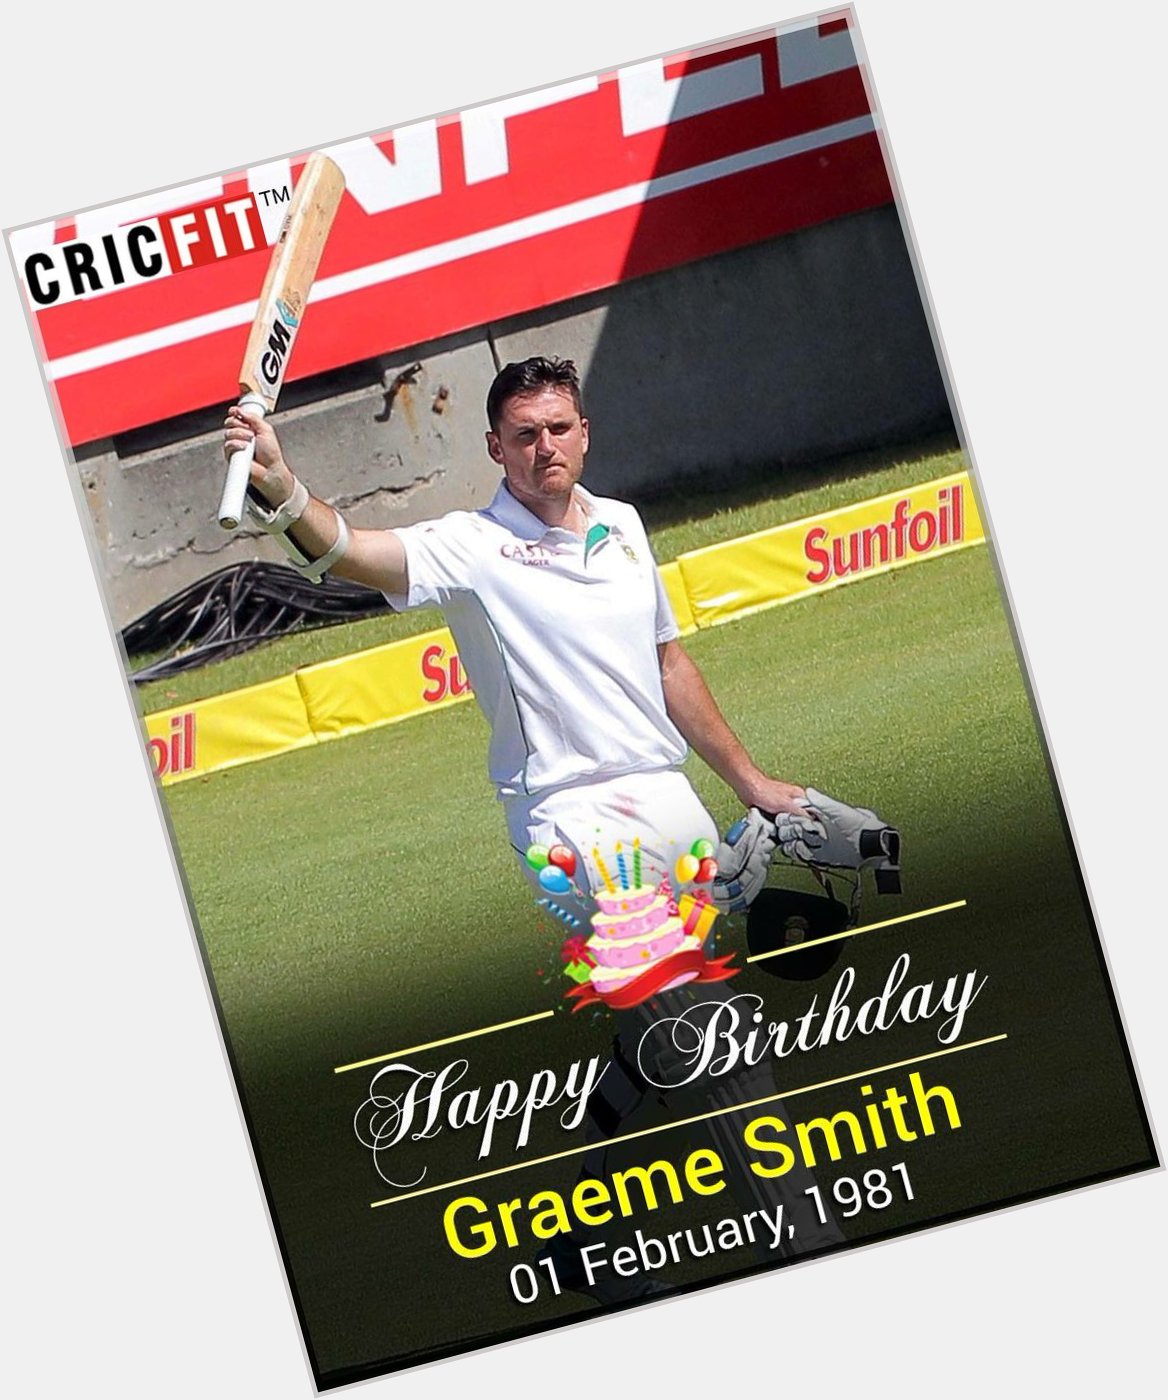 Cricfit Wishes Graeme Smith a Very Happy Birthday! 